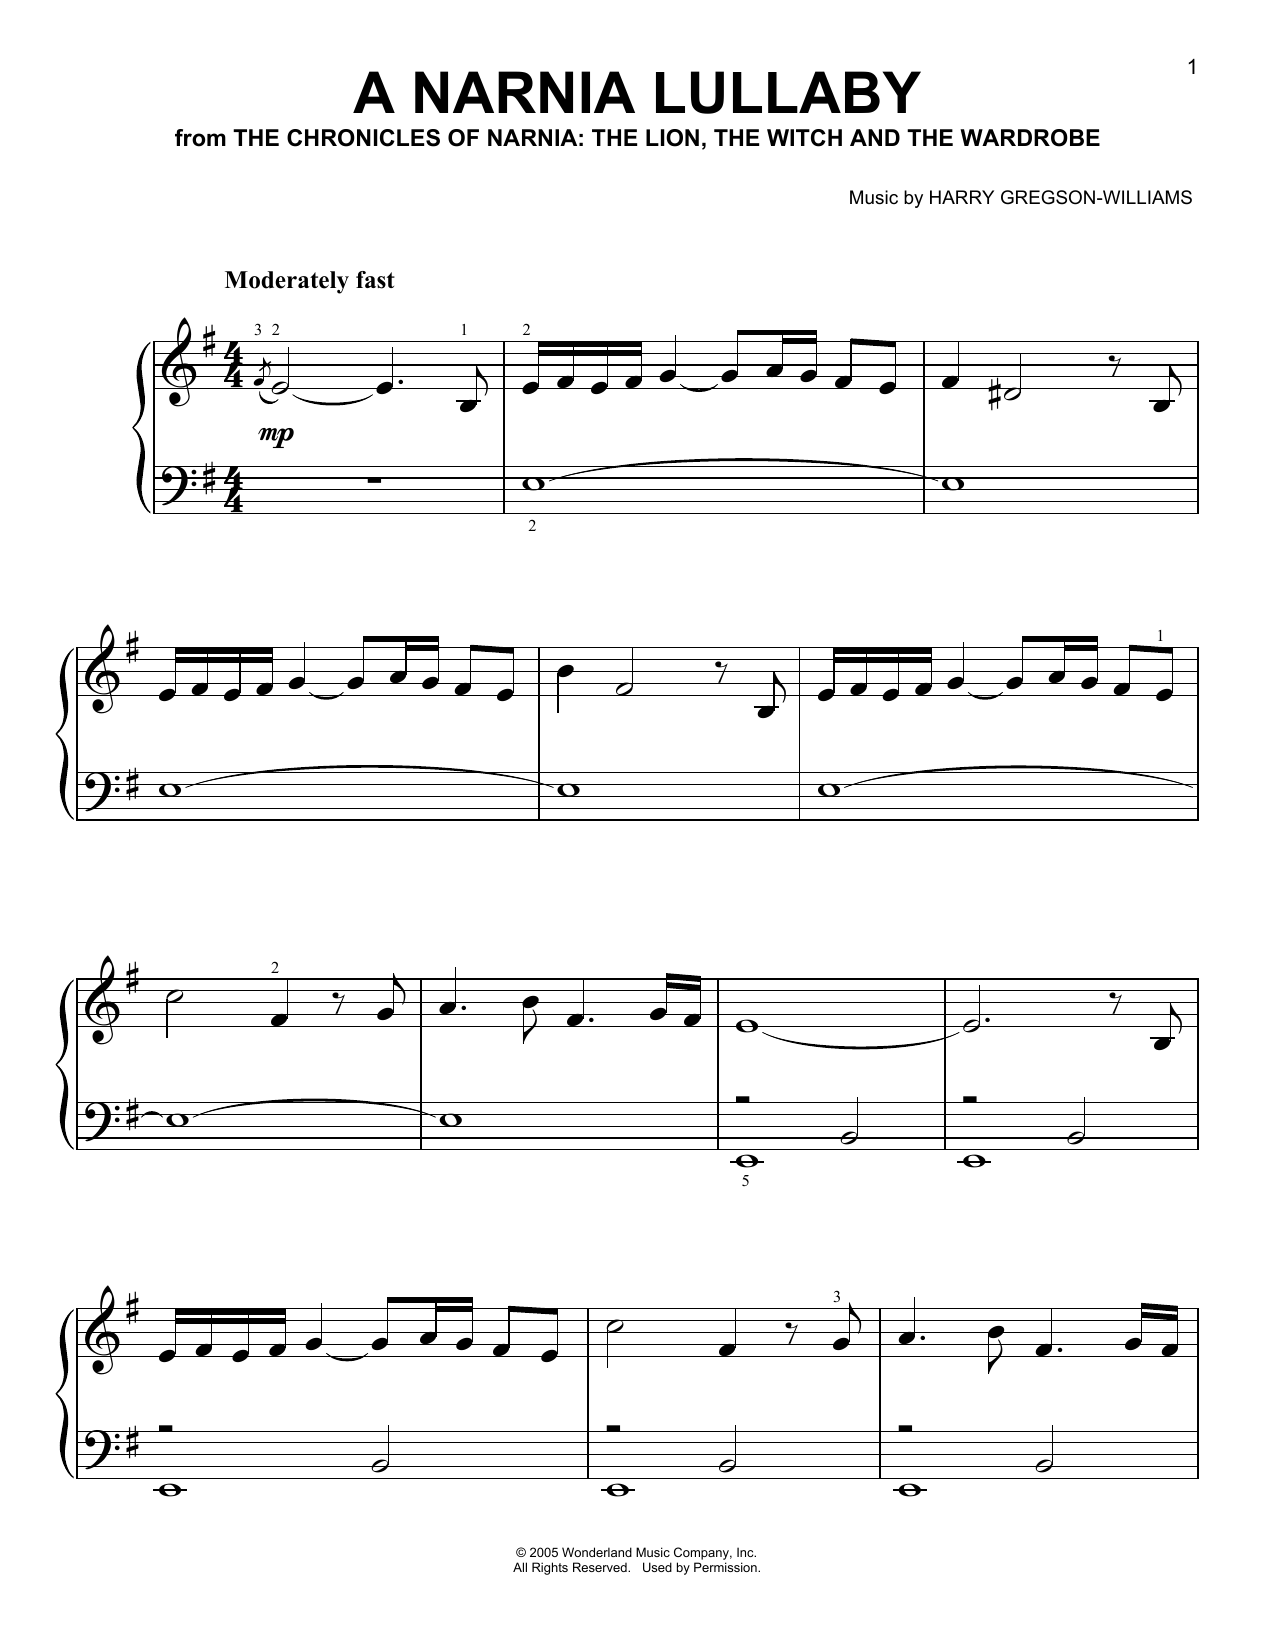 Download Harry Gregson-Williams A Narnia Lullaby Sheet Music